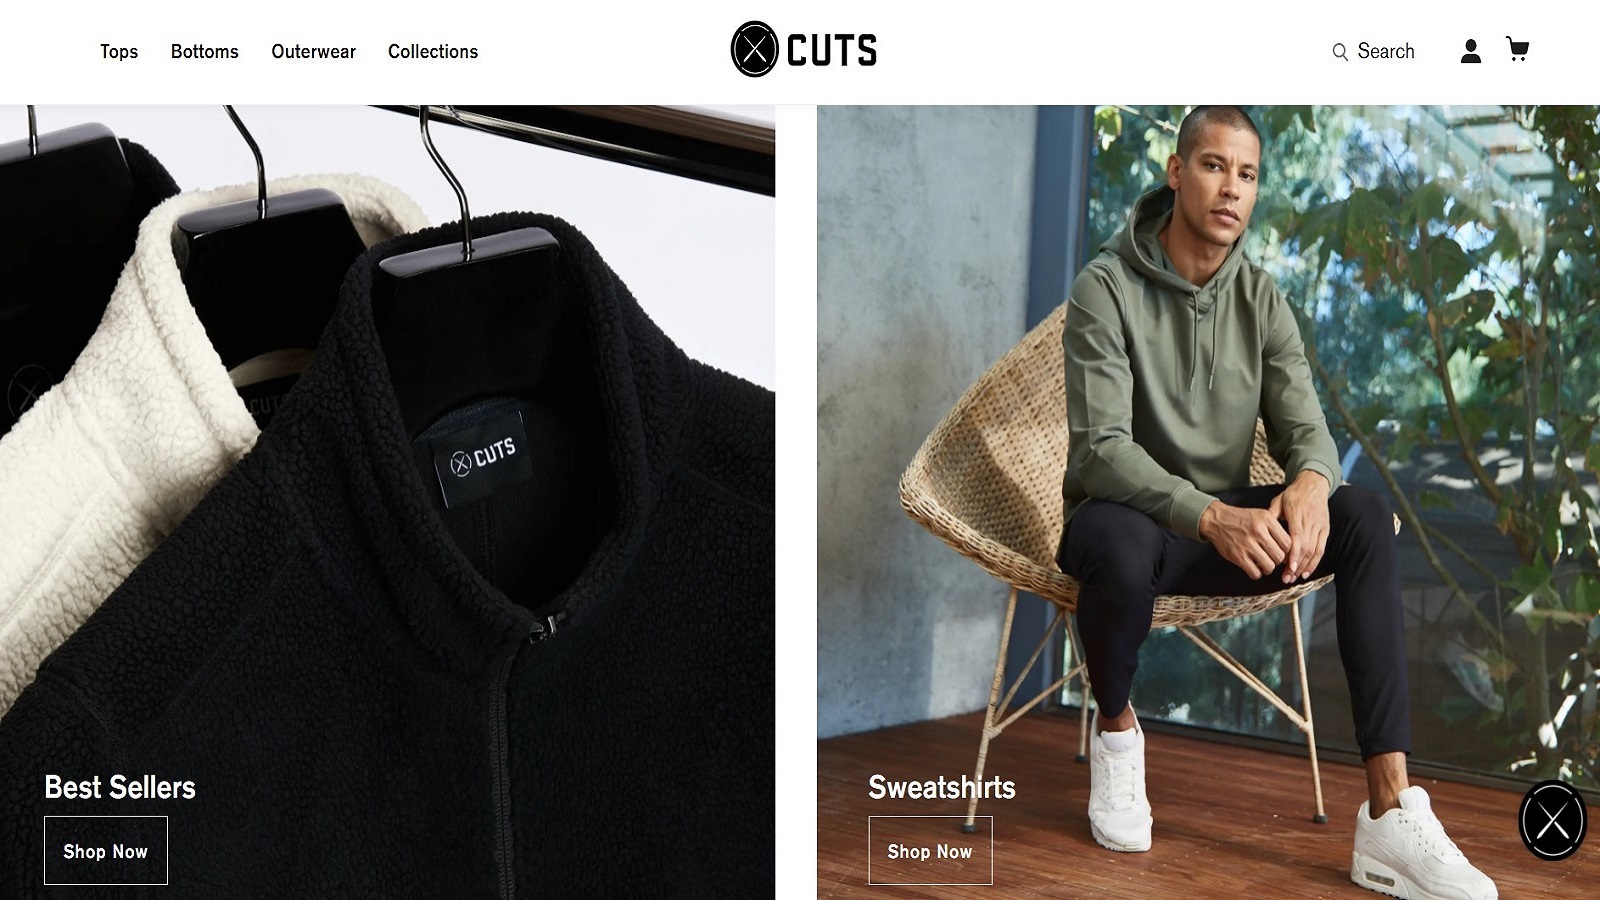 cuts-clothing-review-pros-and-cons-does-it-worth-to-buy-cherry-picks